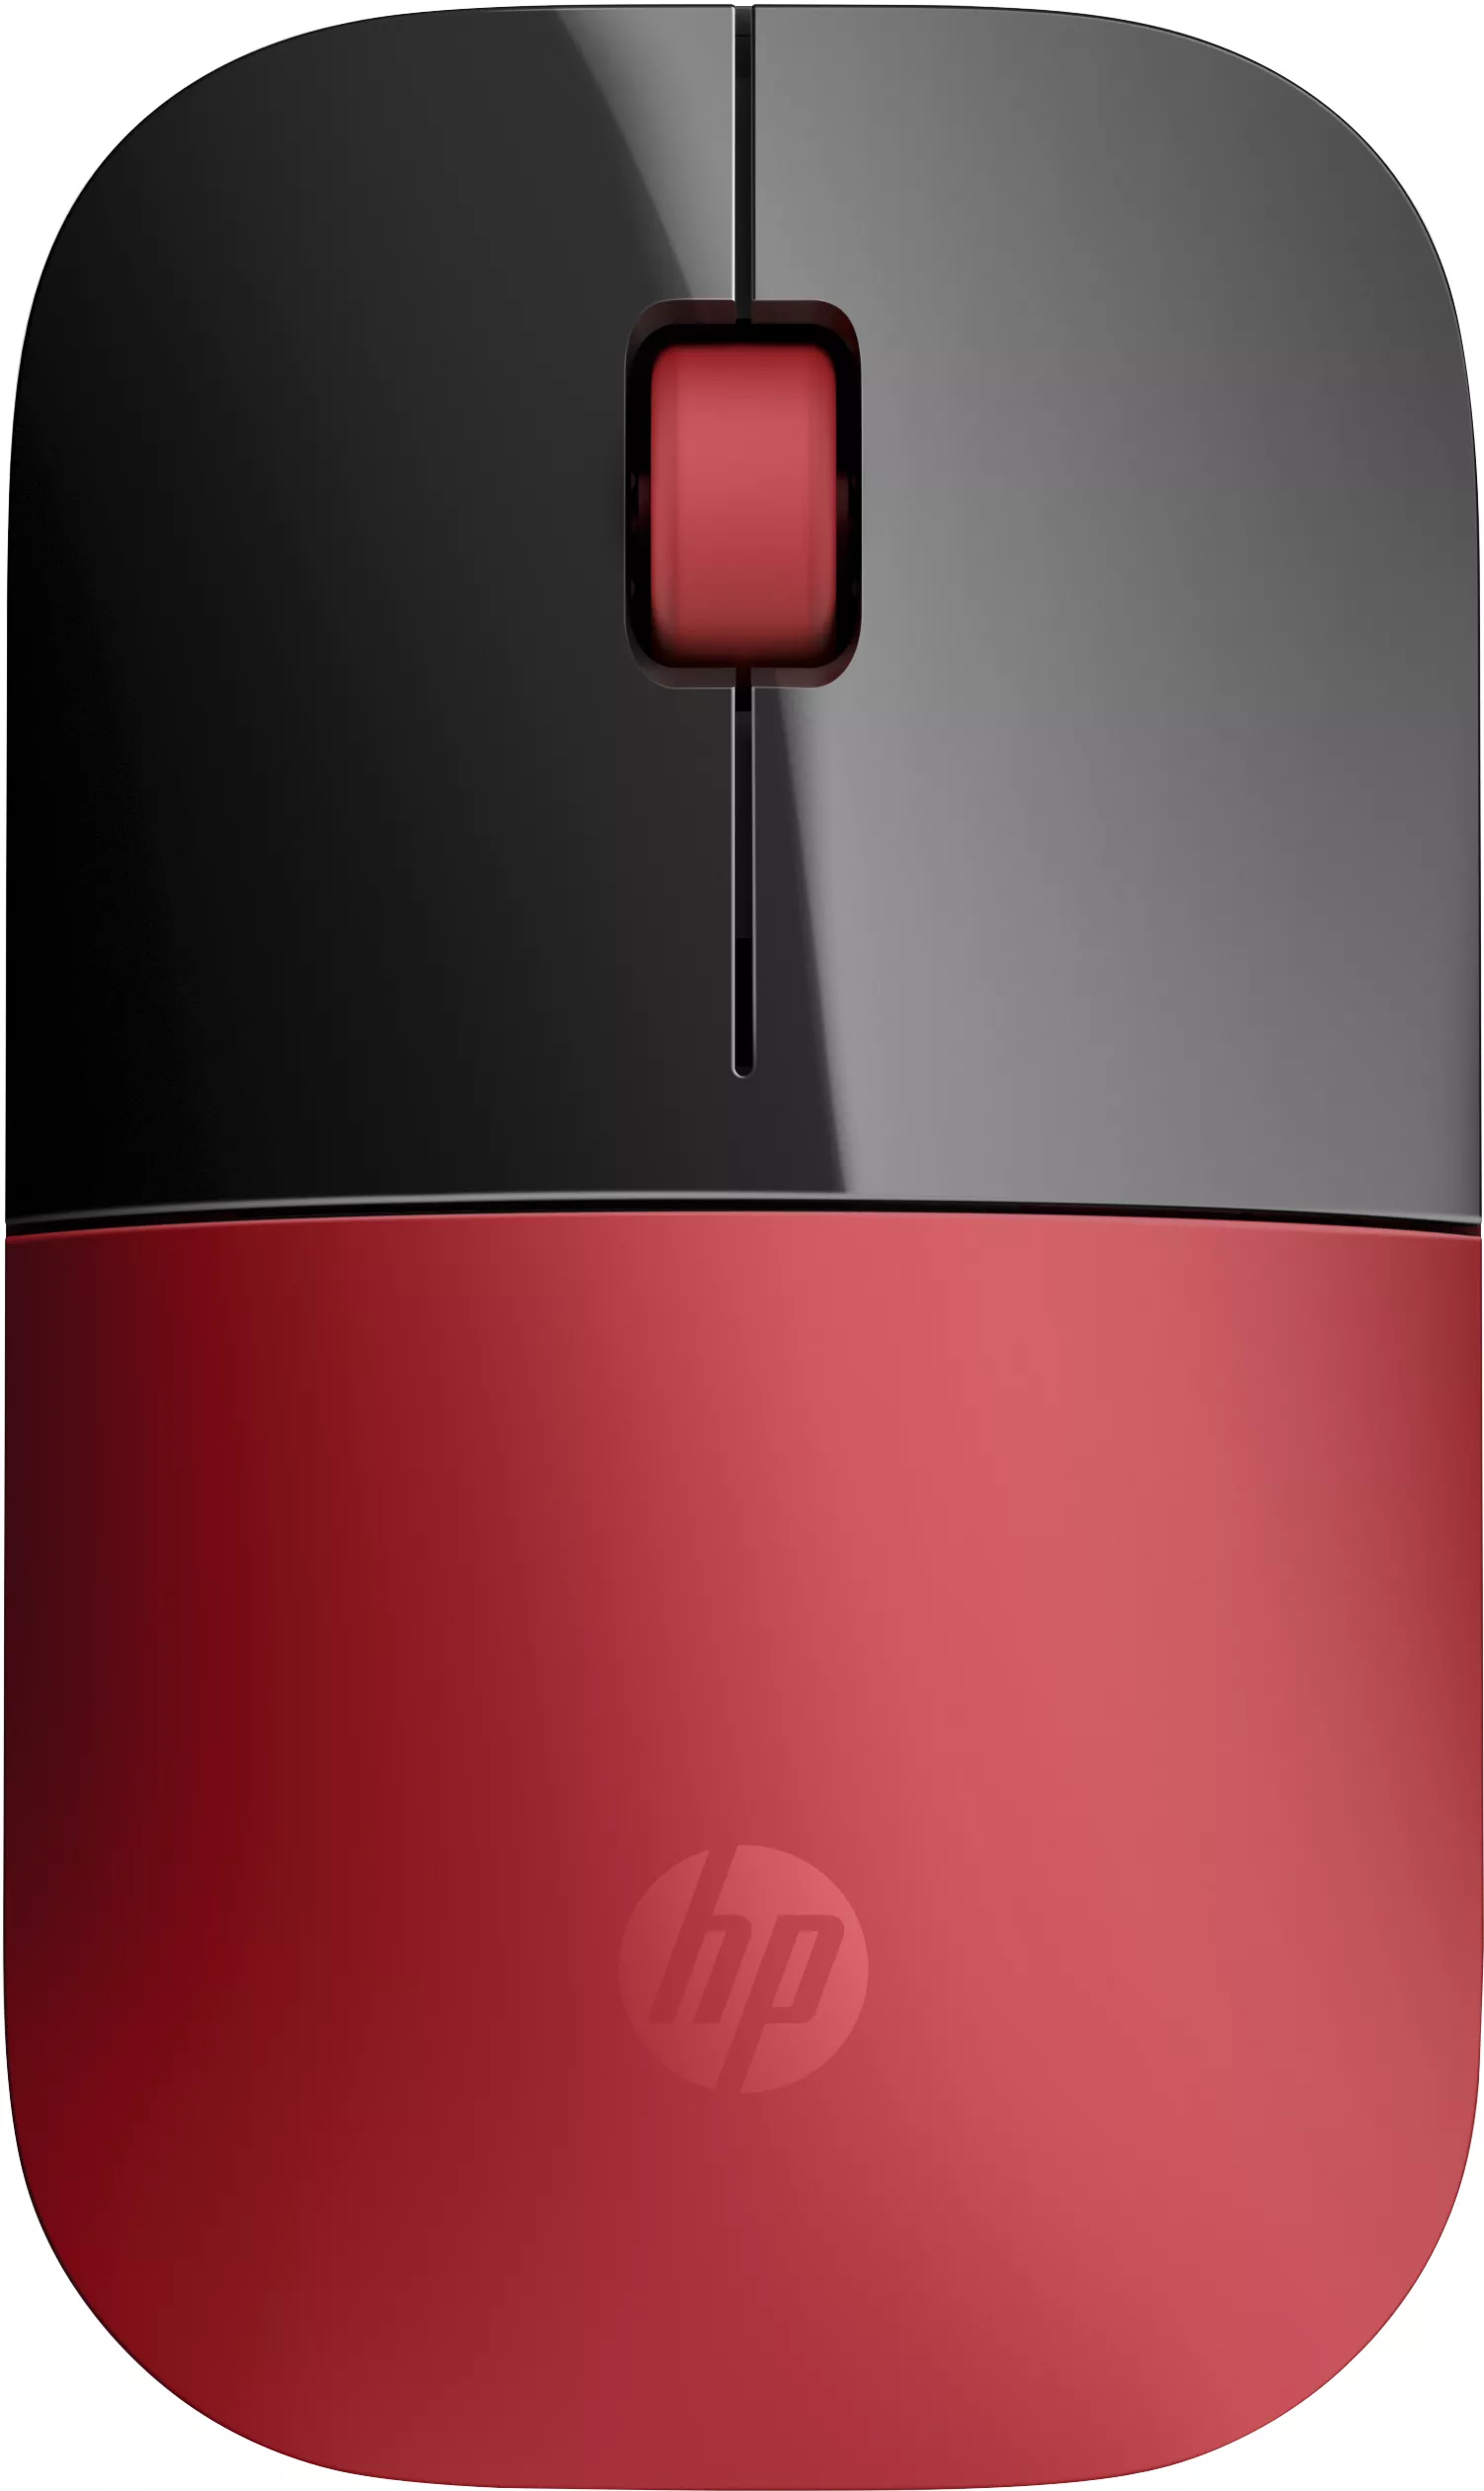 Achat HP Z3700 Wireless Mouse Cardinal Red sur hello RSE - visuel 5